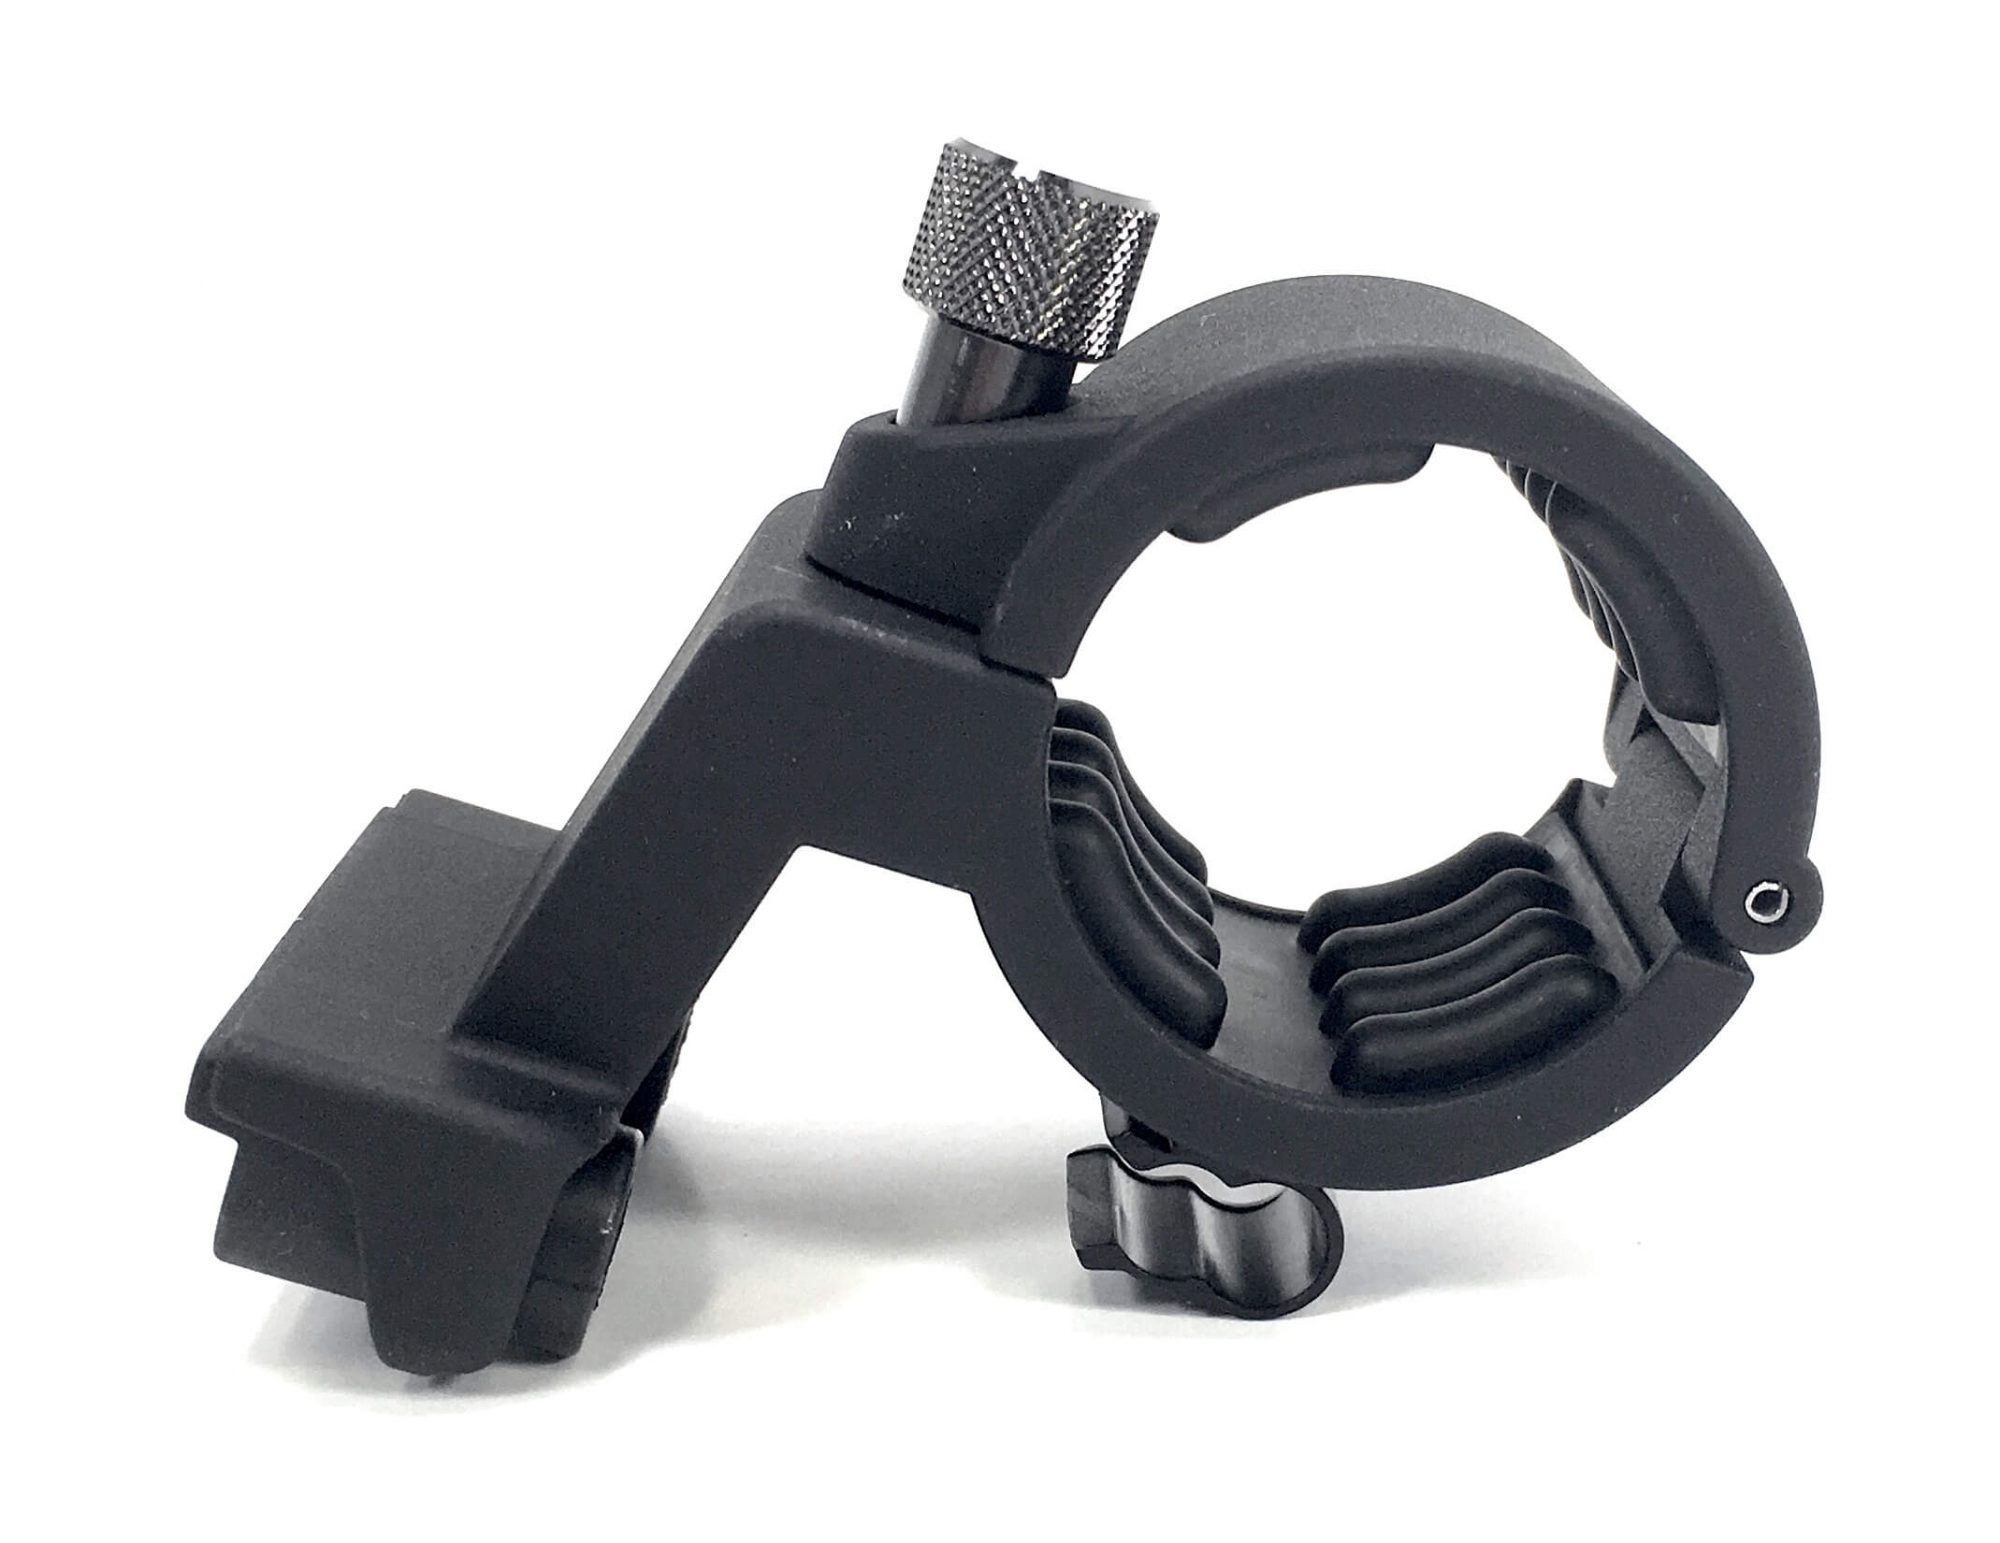 Original Microphone Holder for the Canon XA25 camcorder. It is a genuine Canon part, sourced directly from Canon USA. Brand new factory fresh. Free Shipping. Screws Sold Separately.